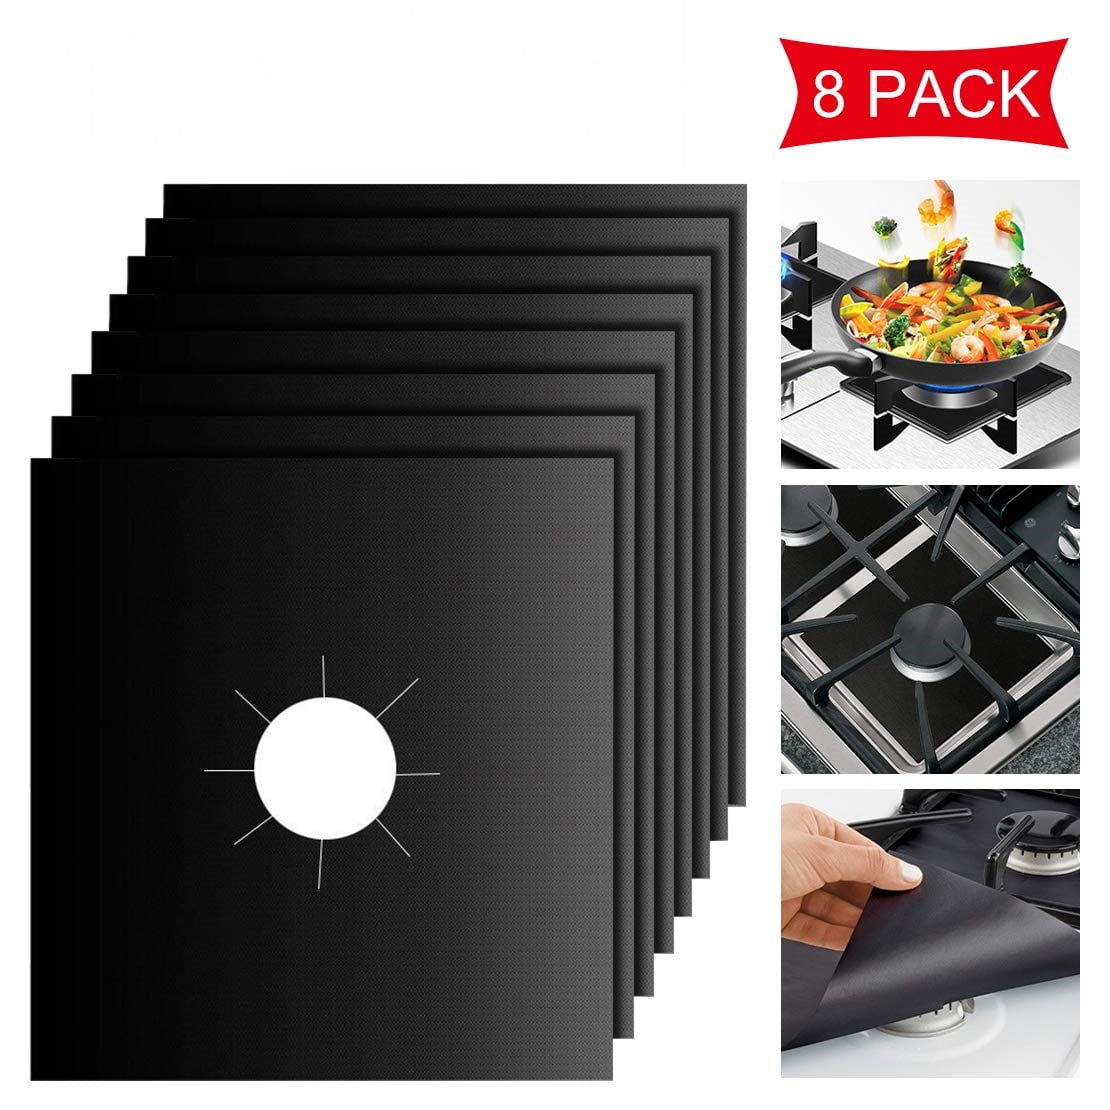 Silver 2 Pack Stove Burner Covers,Double Thickness Reusable Non-Stick Heat-Resistant Gas Range Protectors,Cuttable Stovetop Burner Liners for Kitchen and Easy to Clean,Size 10.6” x 10.6” 